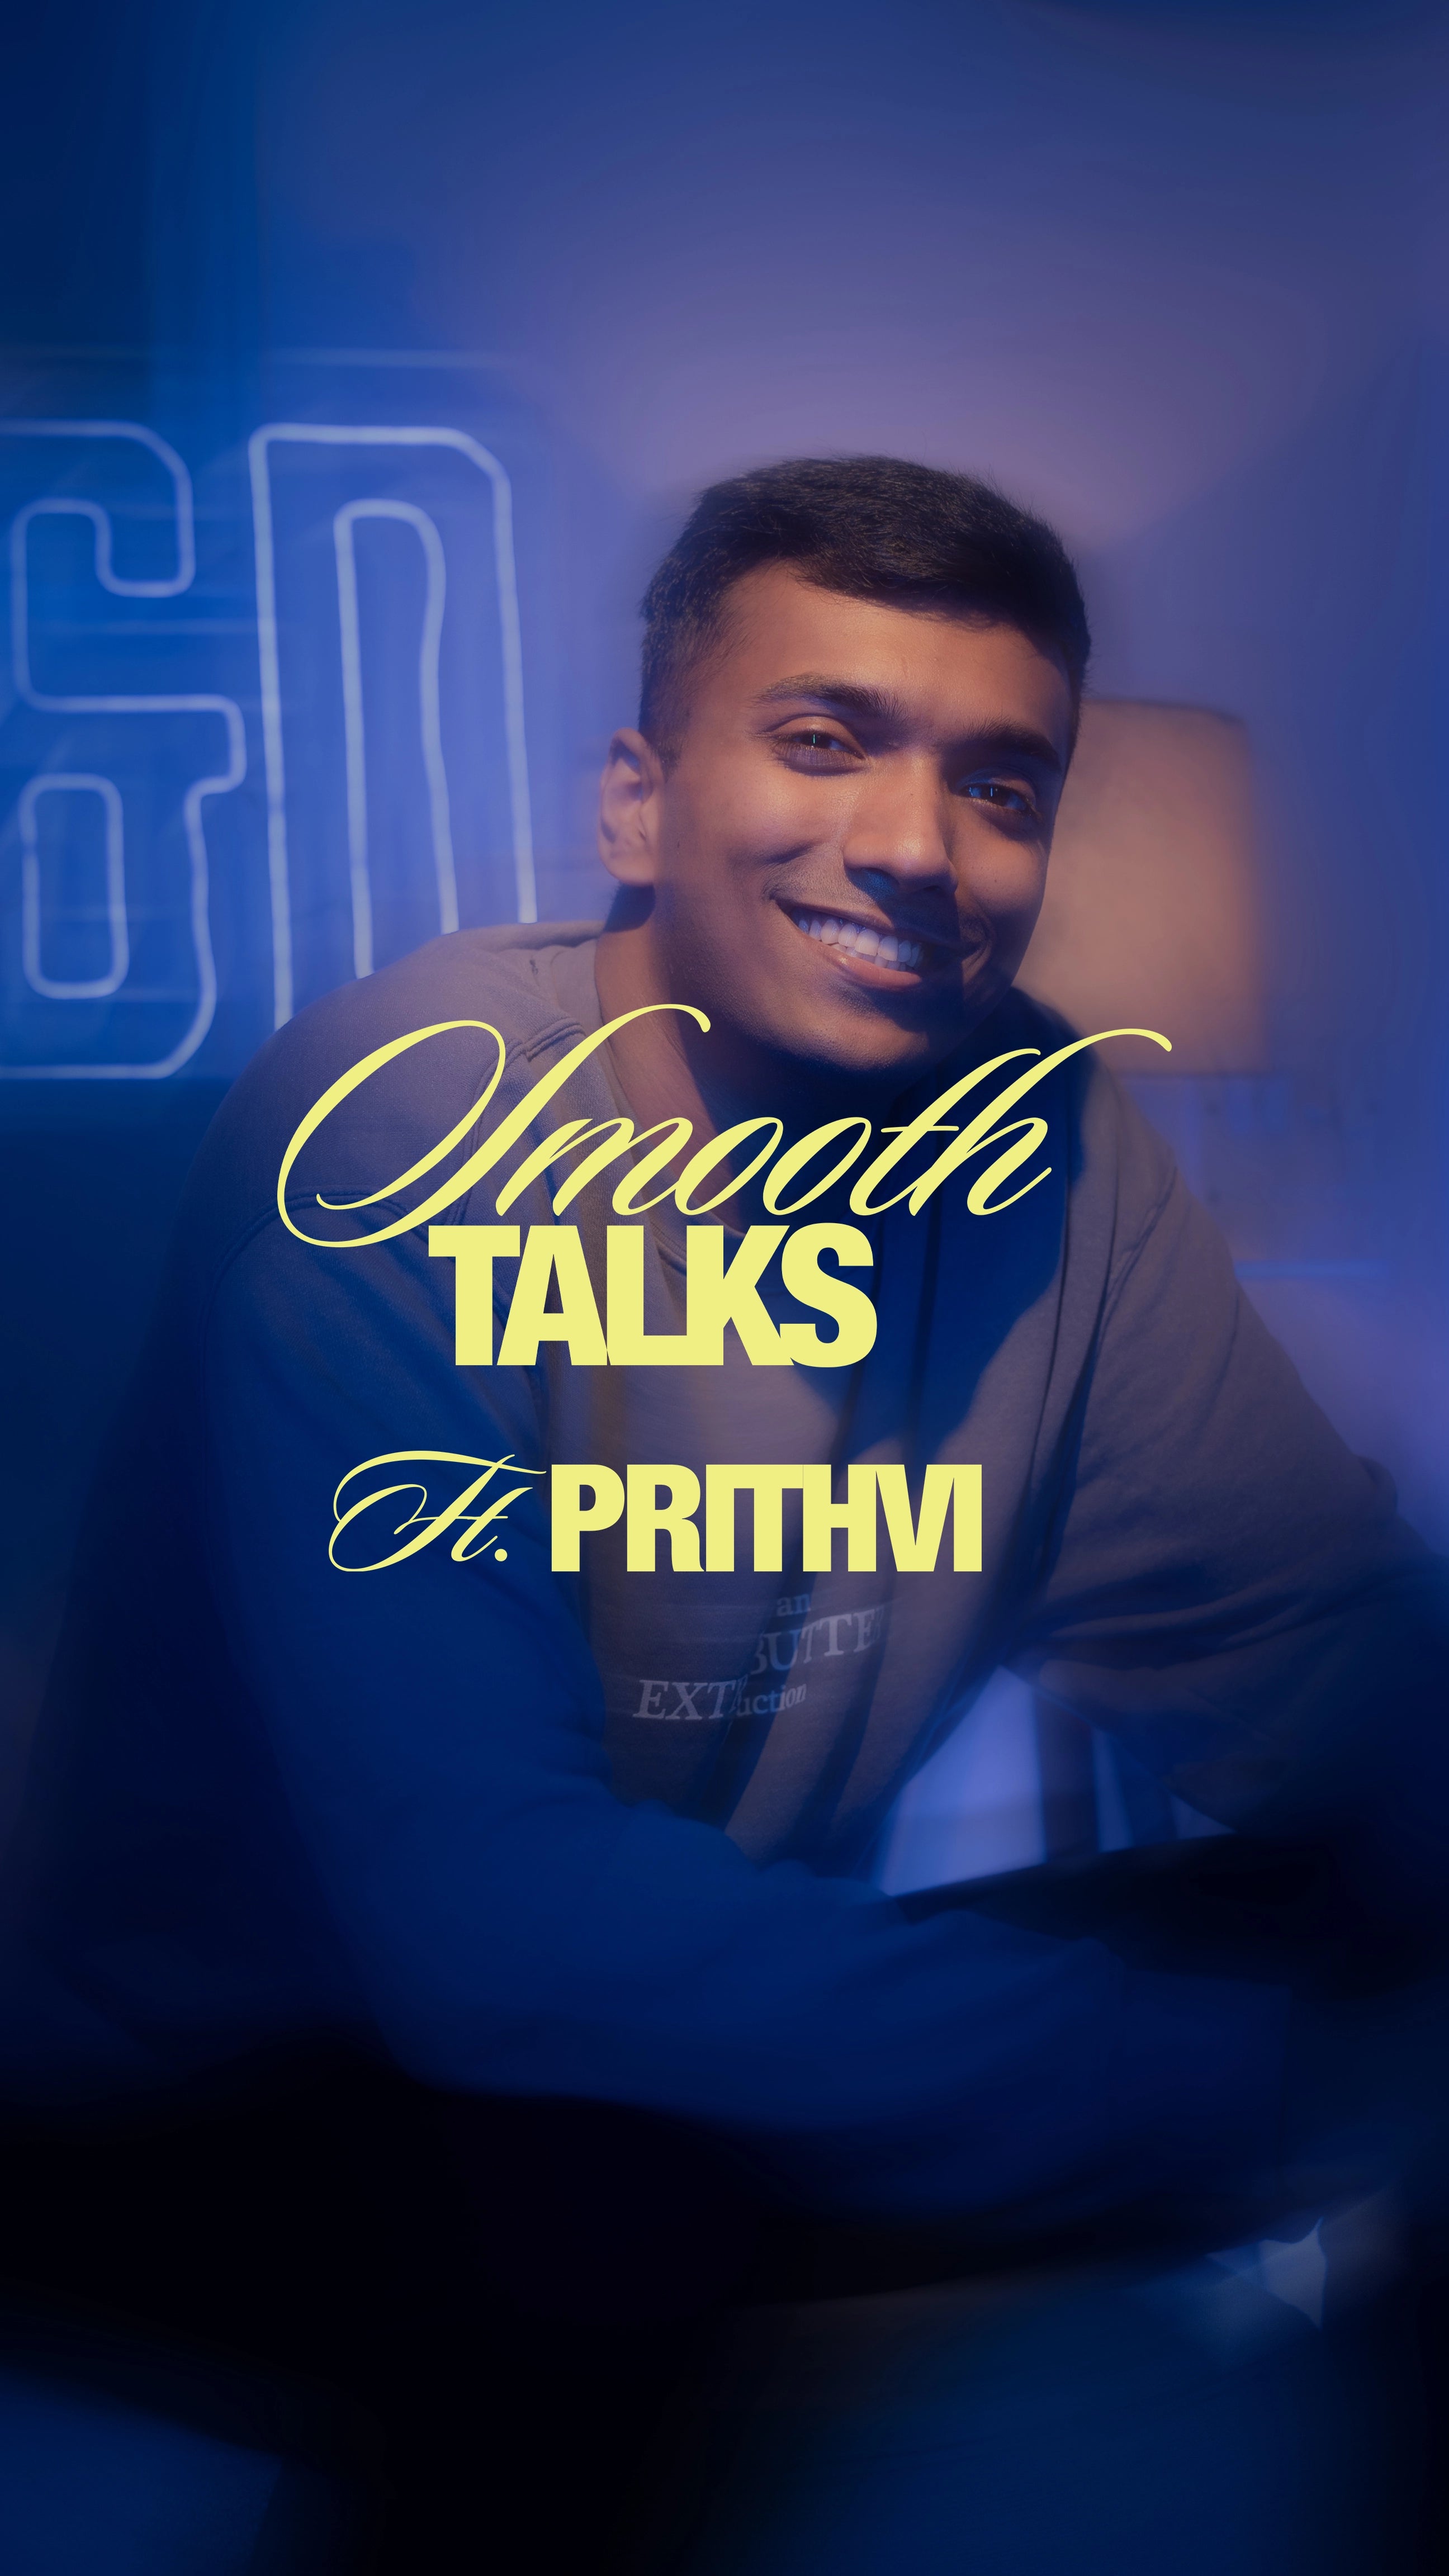 Extra Butter Smooth Talks: Featuring Prithvi card image